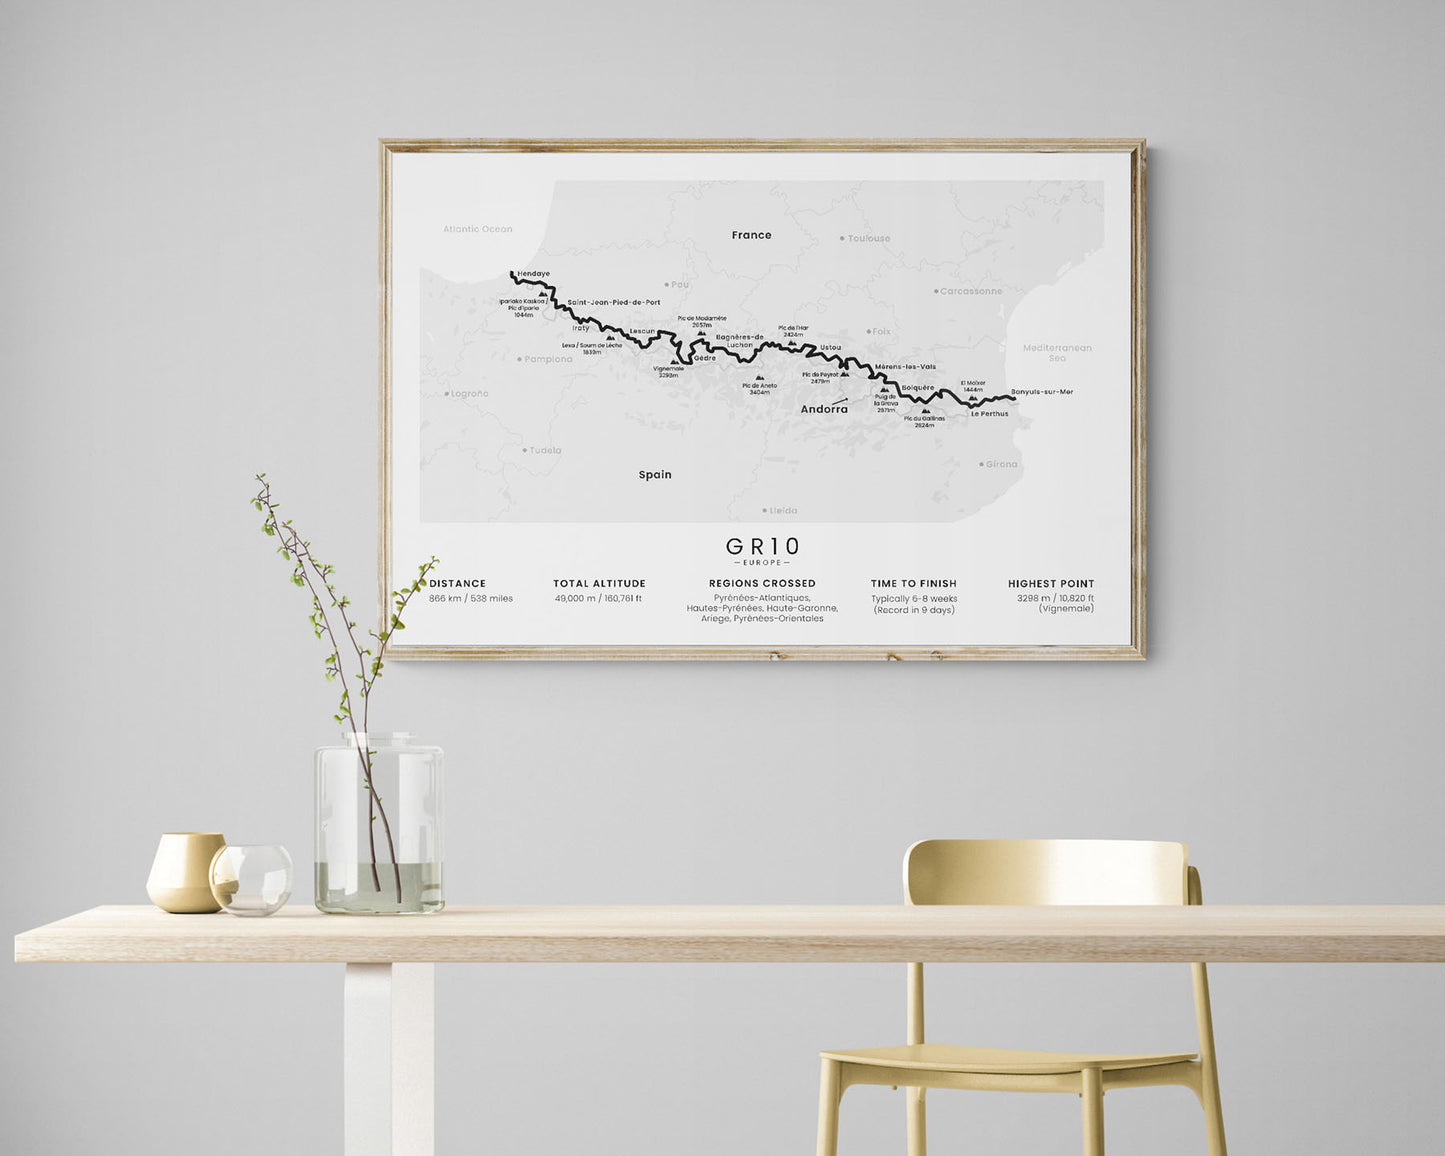 GR10 (The Pyrenean Way) hiking path map art with white background in living room